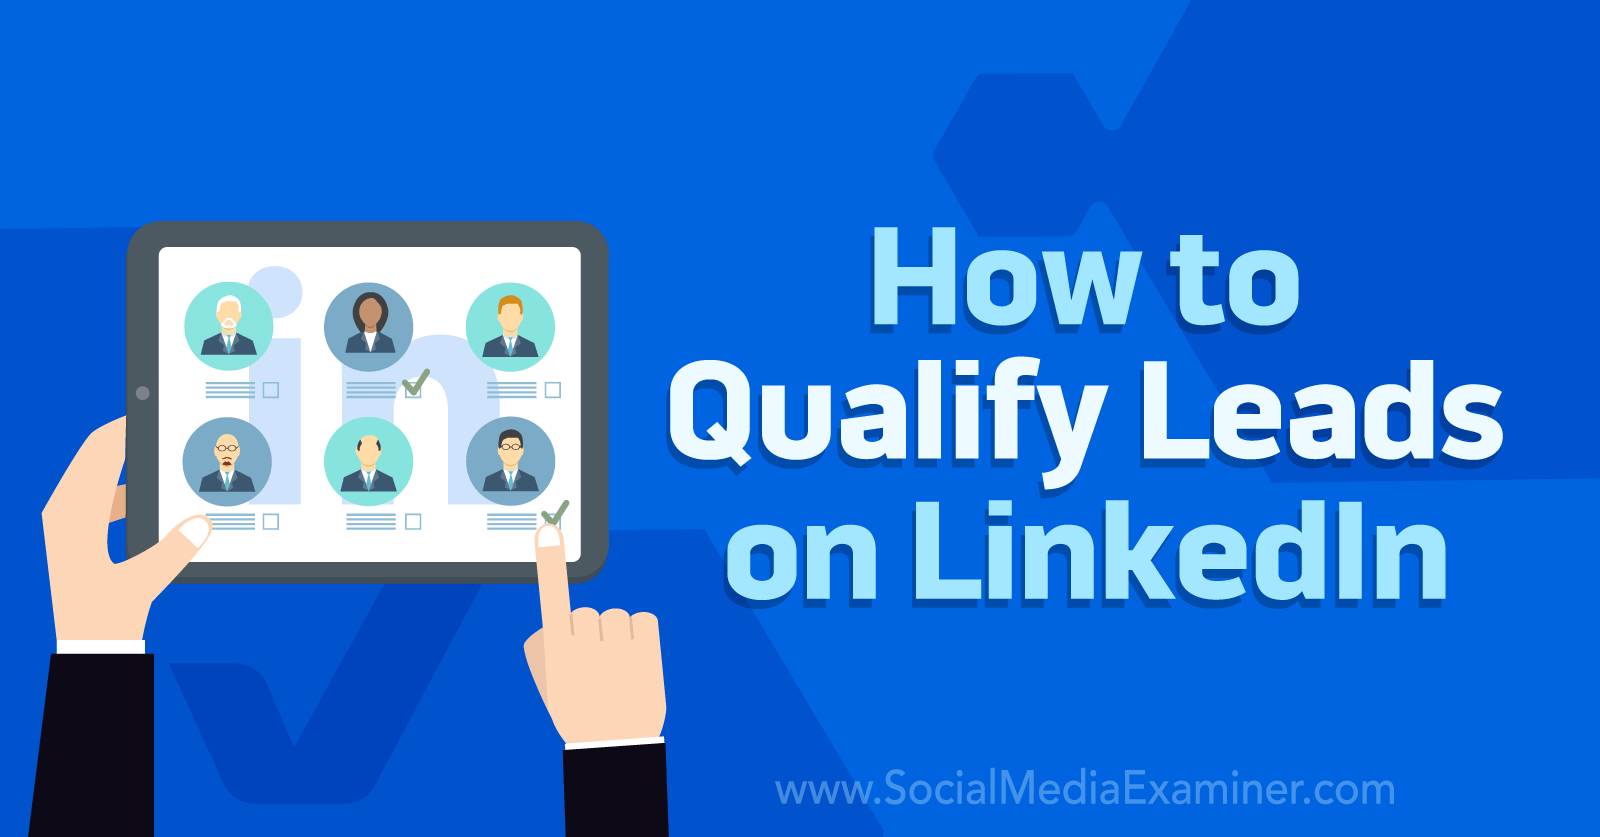 How to Qualify Leads on LinkedIn by Social Media Examiner